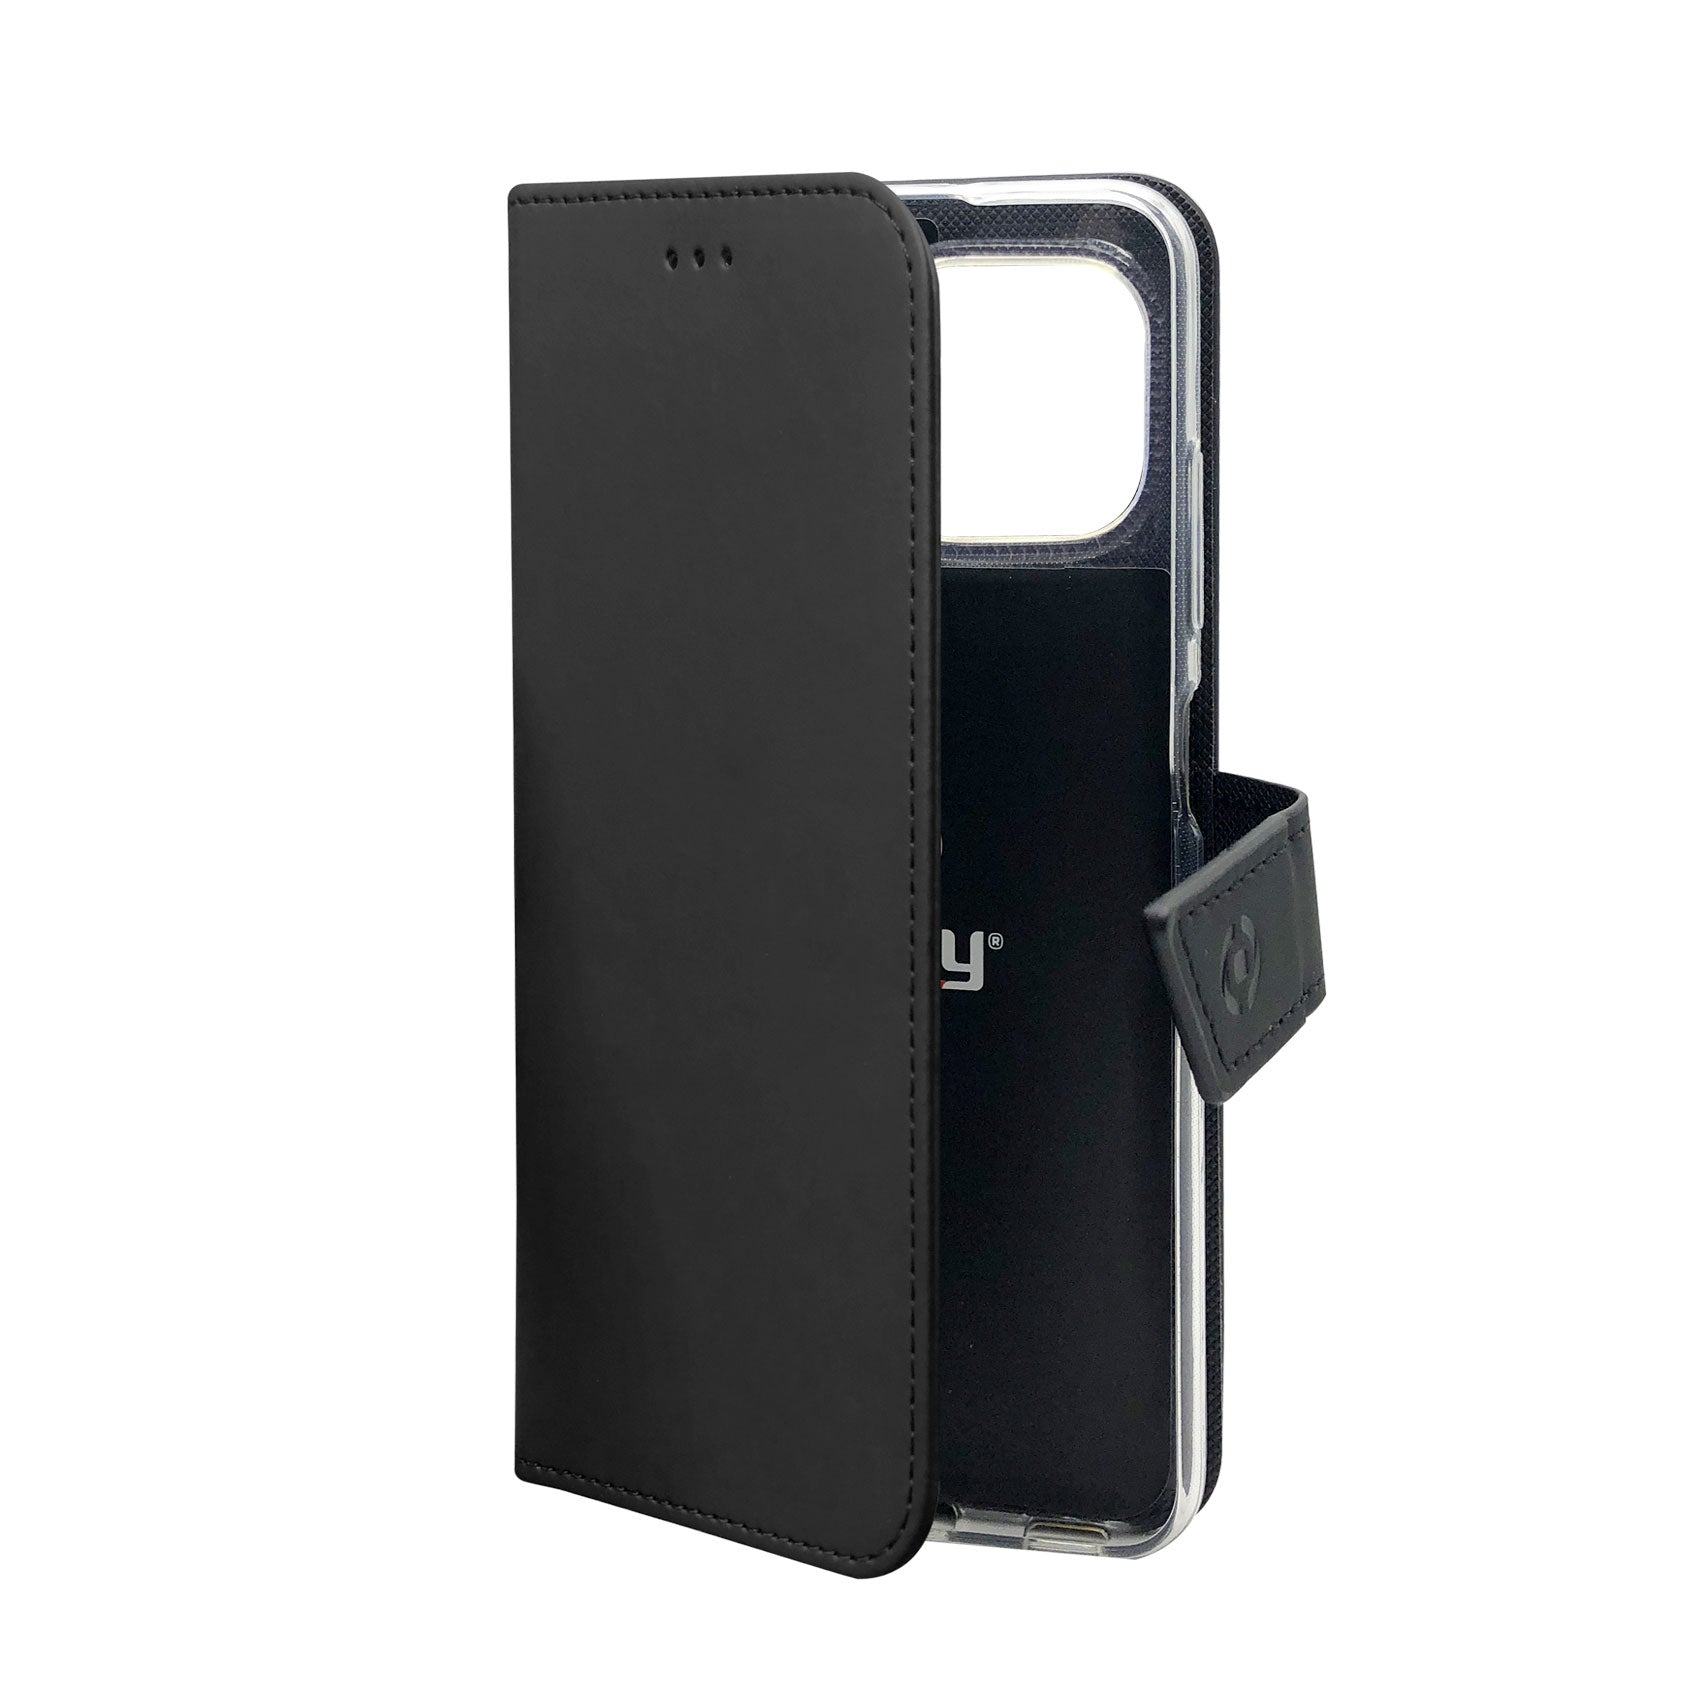 Celly WALLY CASE iPhone 11 BLACK